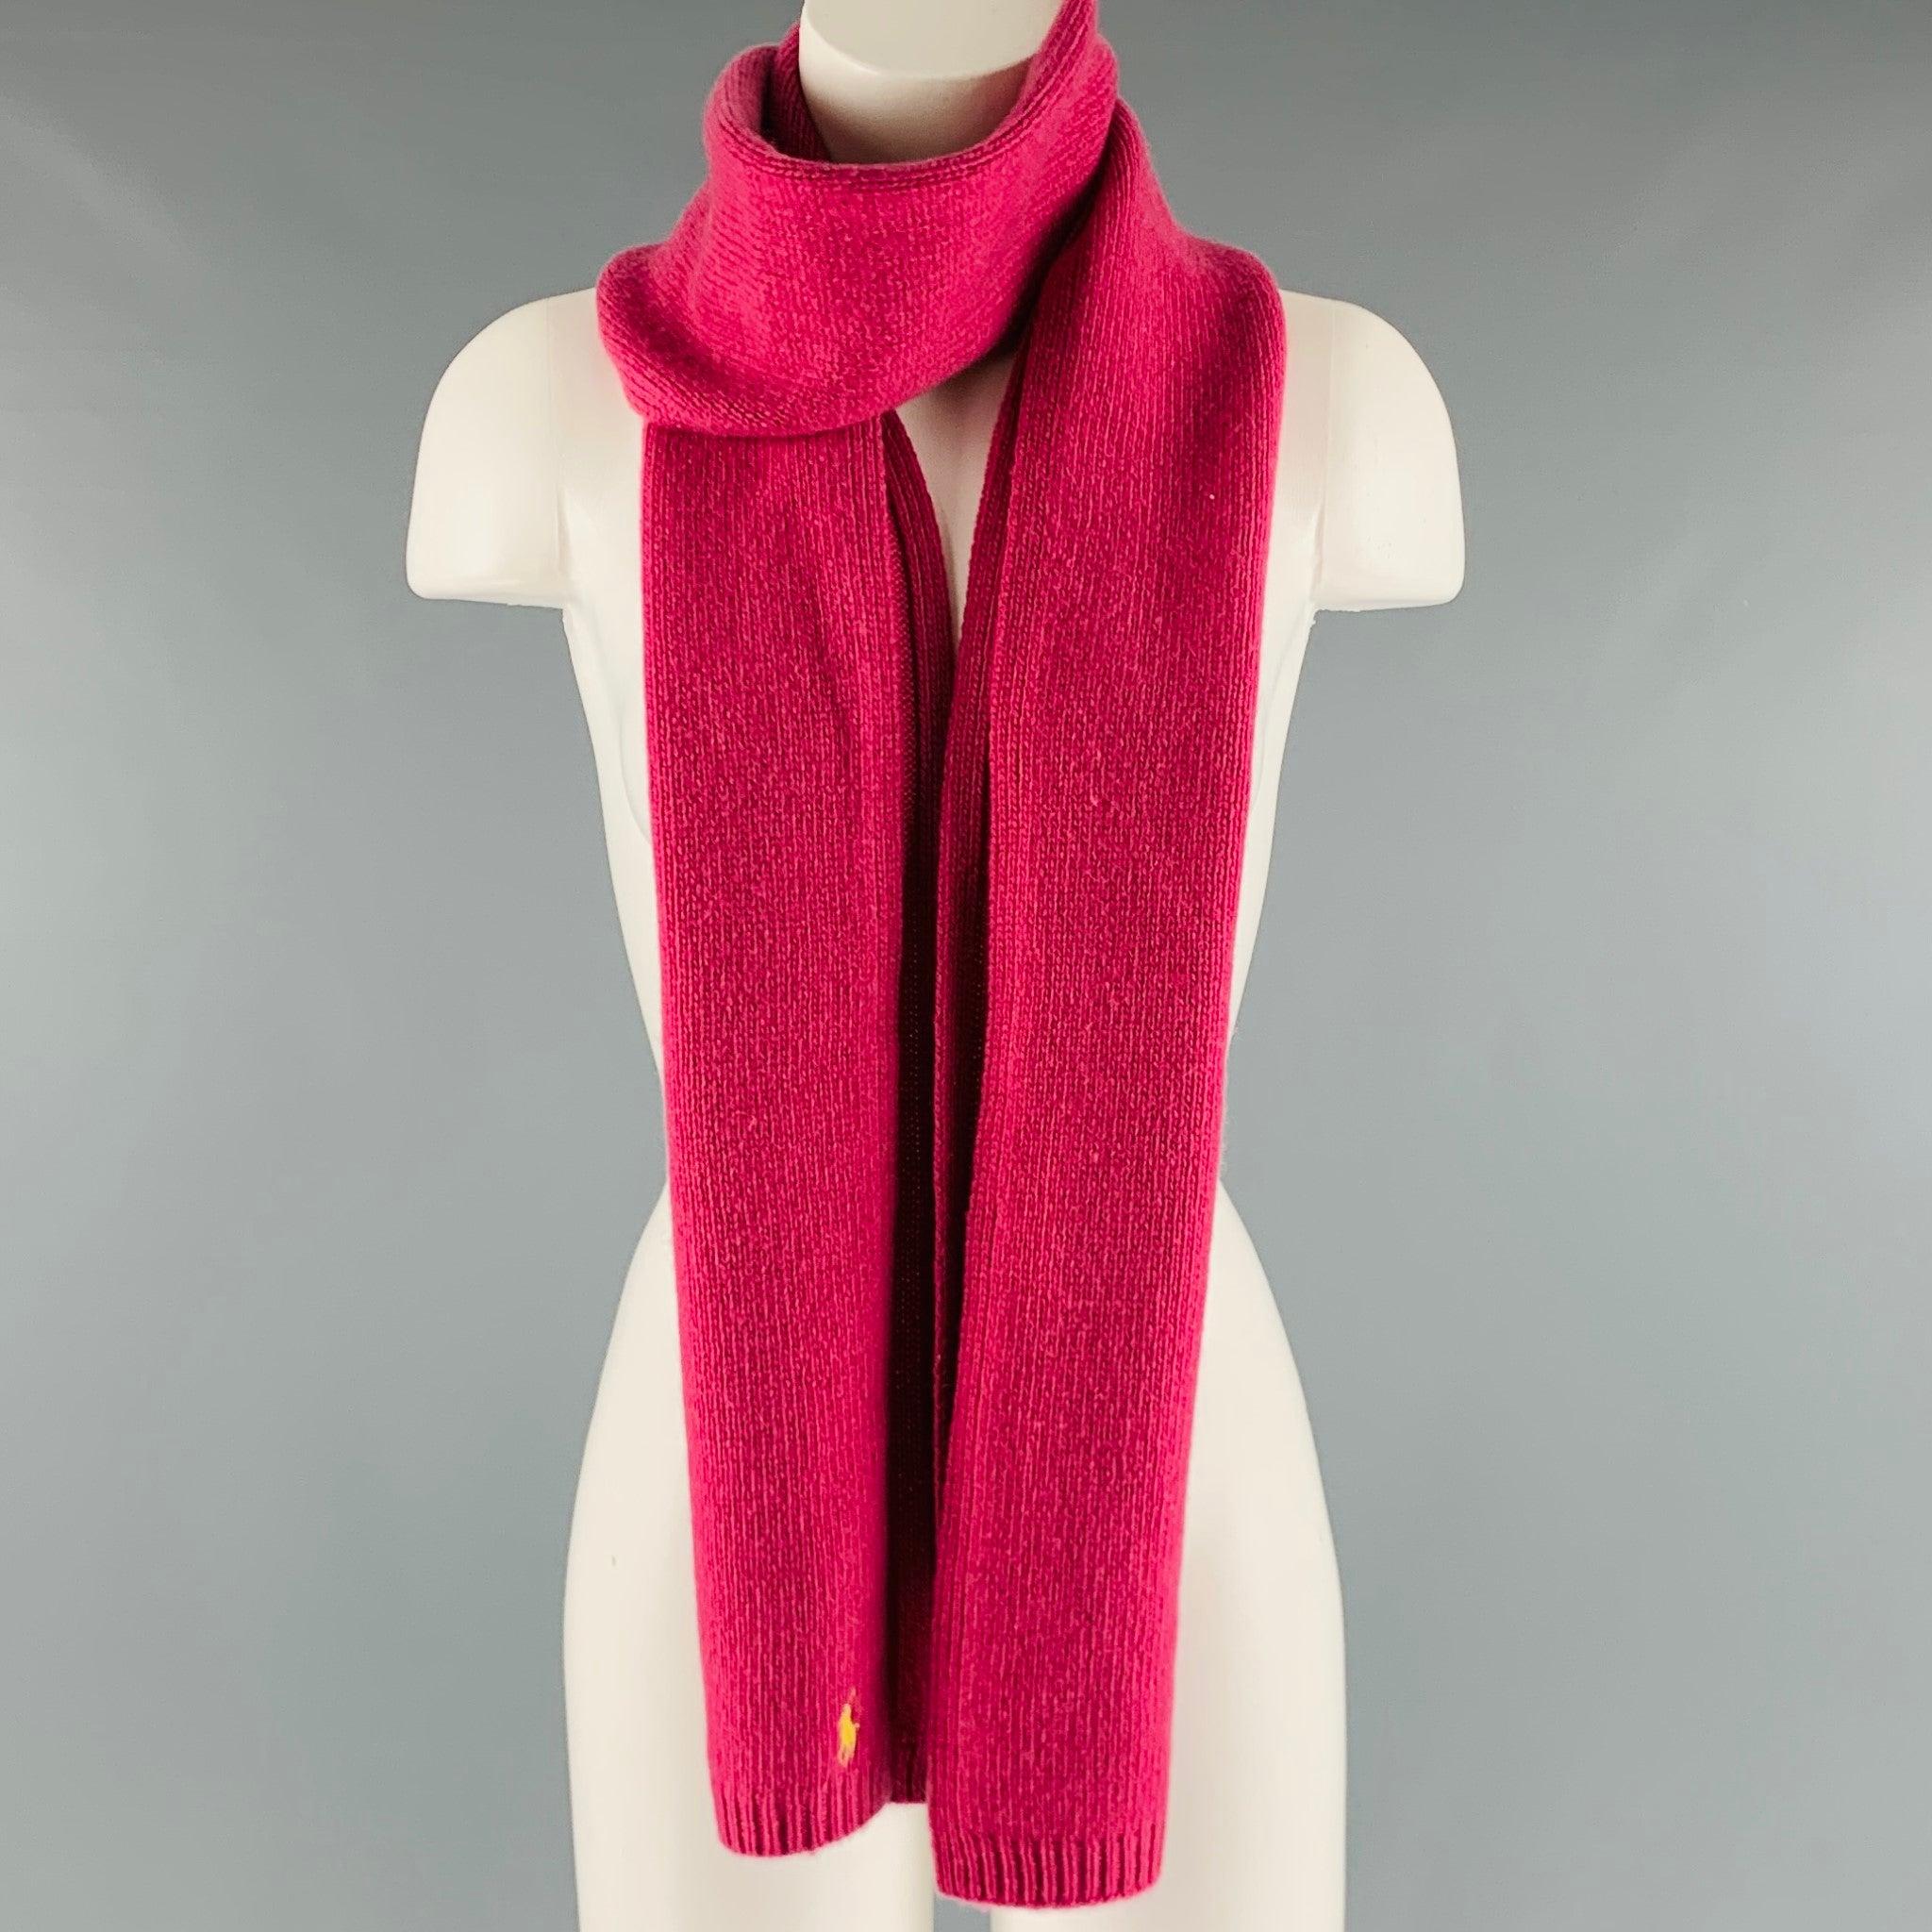 RALPH LAUREN Pink Knitted Cashmere Wool Scarves In Good Condition For Sale In San Francisco, CA